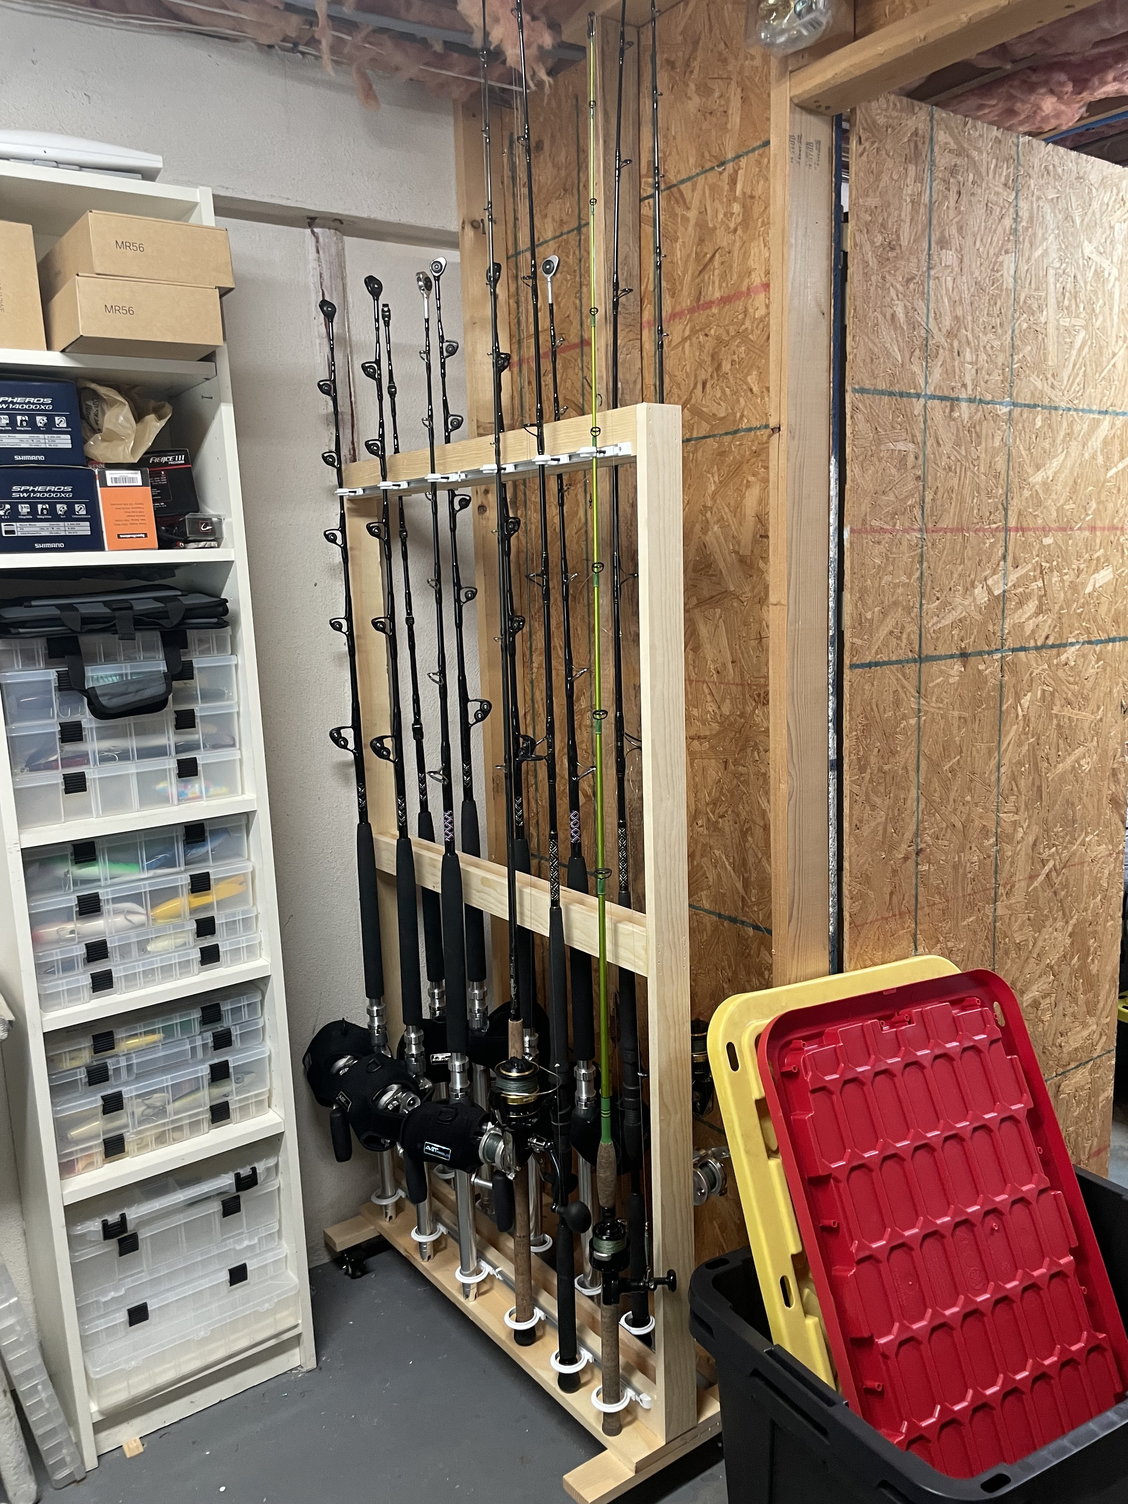 Overhead Rod Holder Ideas - The Hull Truth - Boating and Fishing Forum